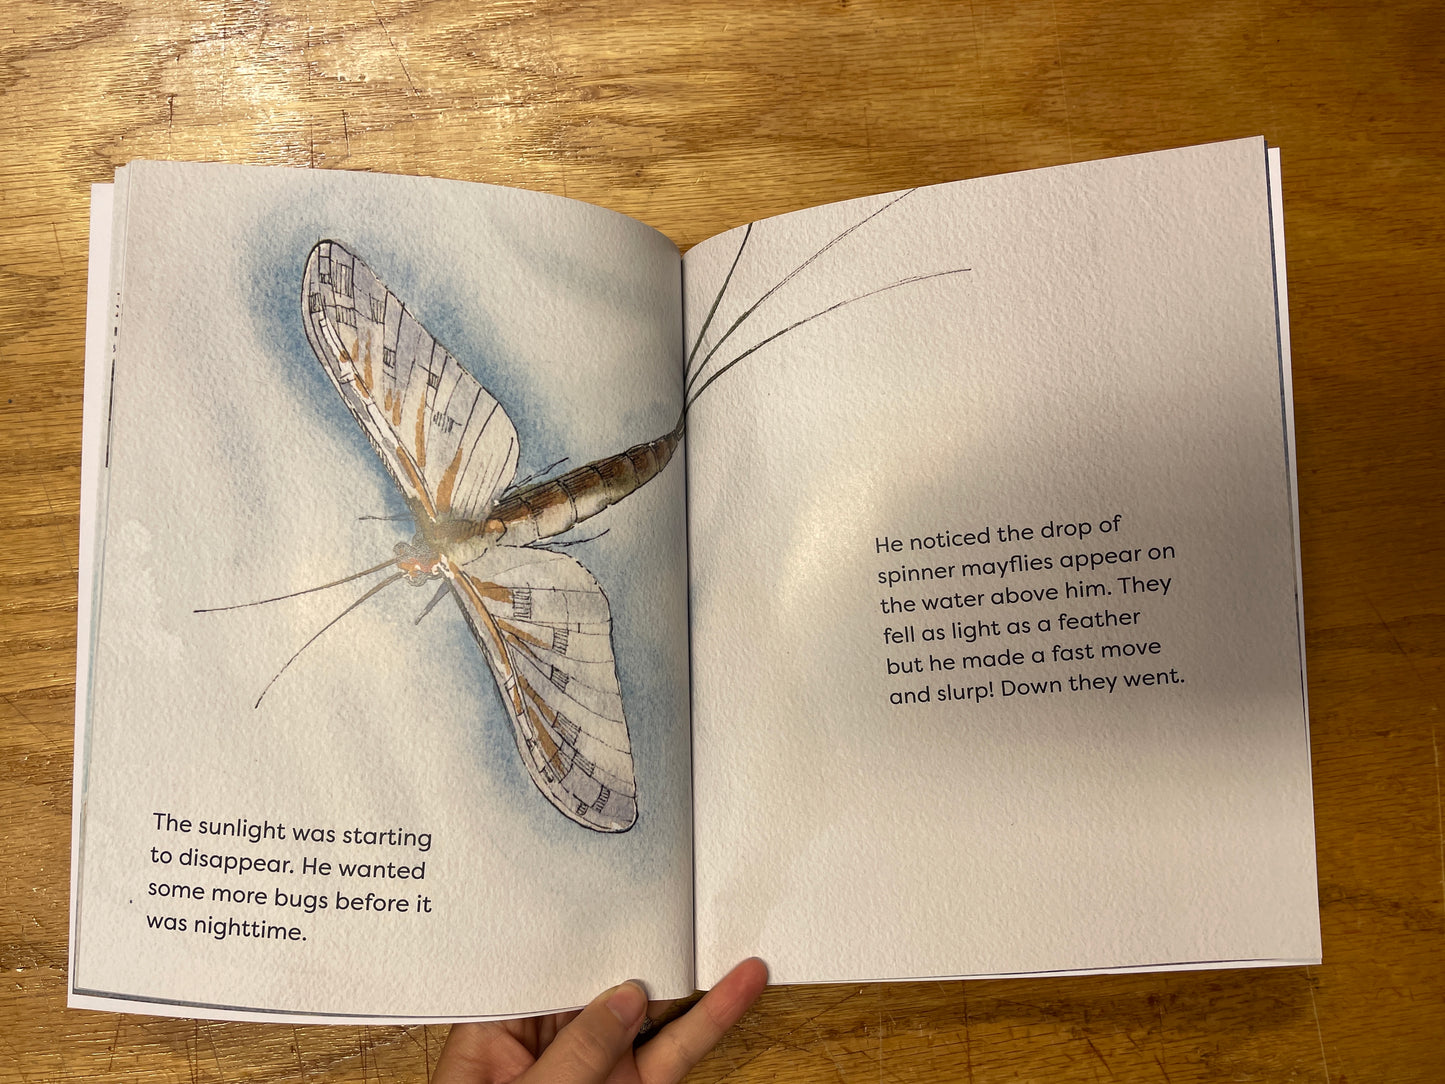 A two page spread of a book with a large mayfly illustrated on the left side.  The text reads the sunlight was starting to disappear.  He wanted some more bugs before it was nighttime.  He noticed the drop of spinner mayflies appear on the water above him.  They fell as light as a feather but he made a fast move and slurp! Down they went.